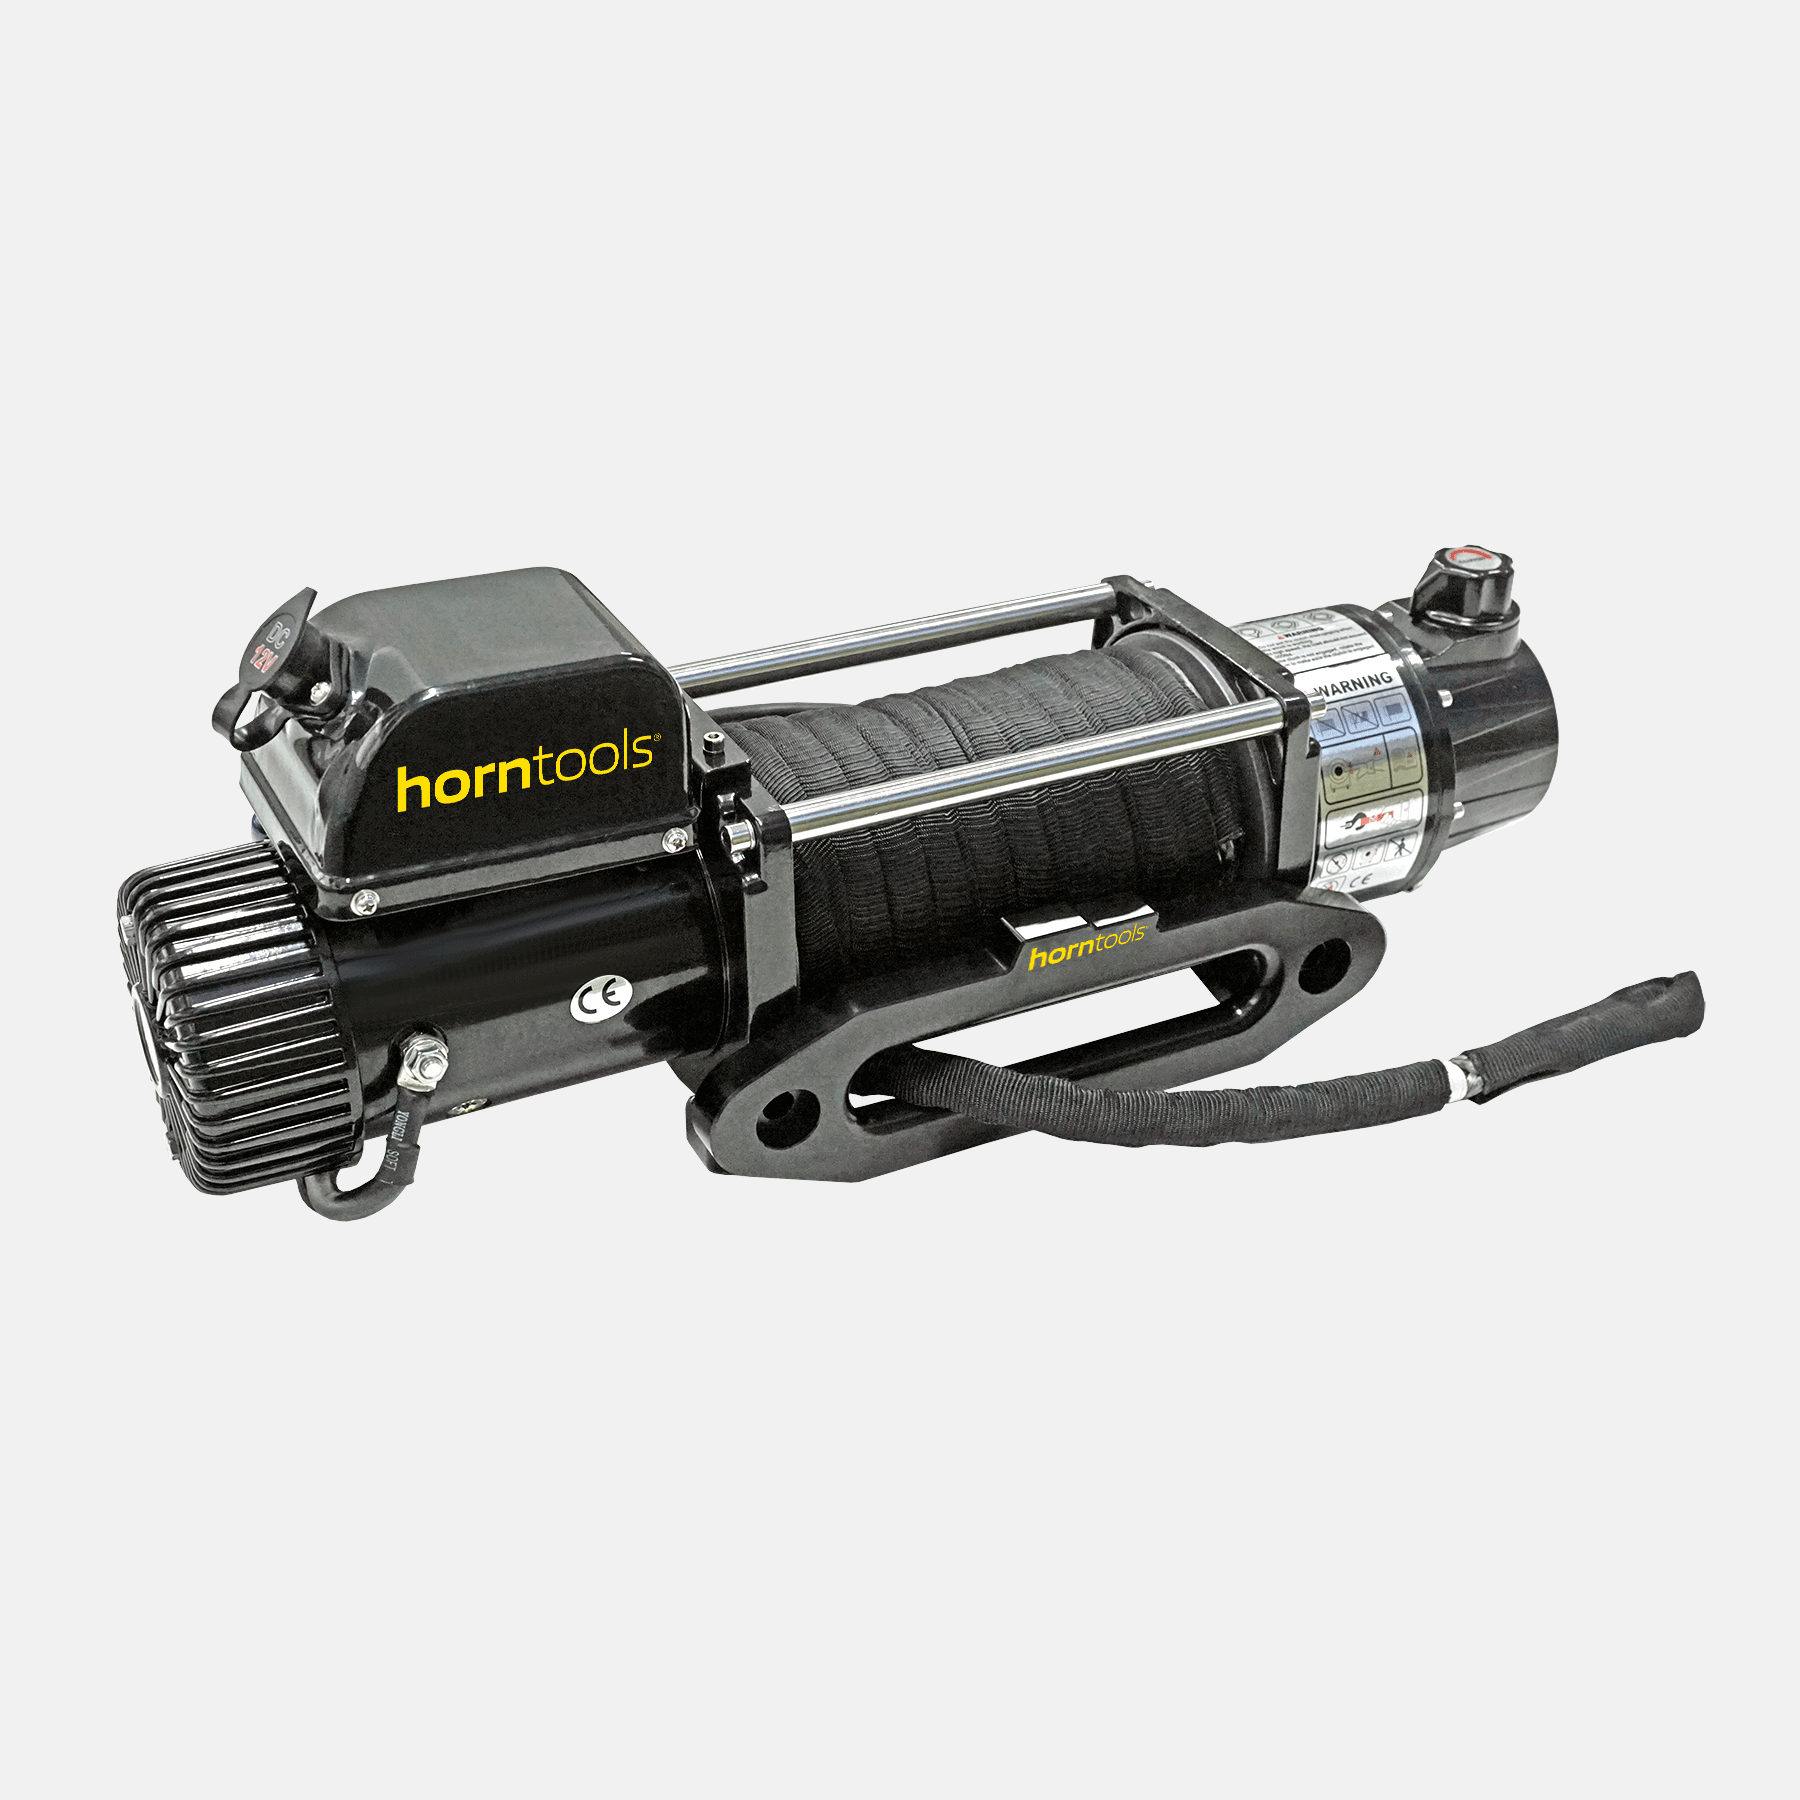 Winch 5.4 tons AlphaG 2-speed with drum brake